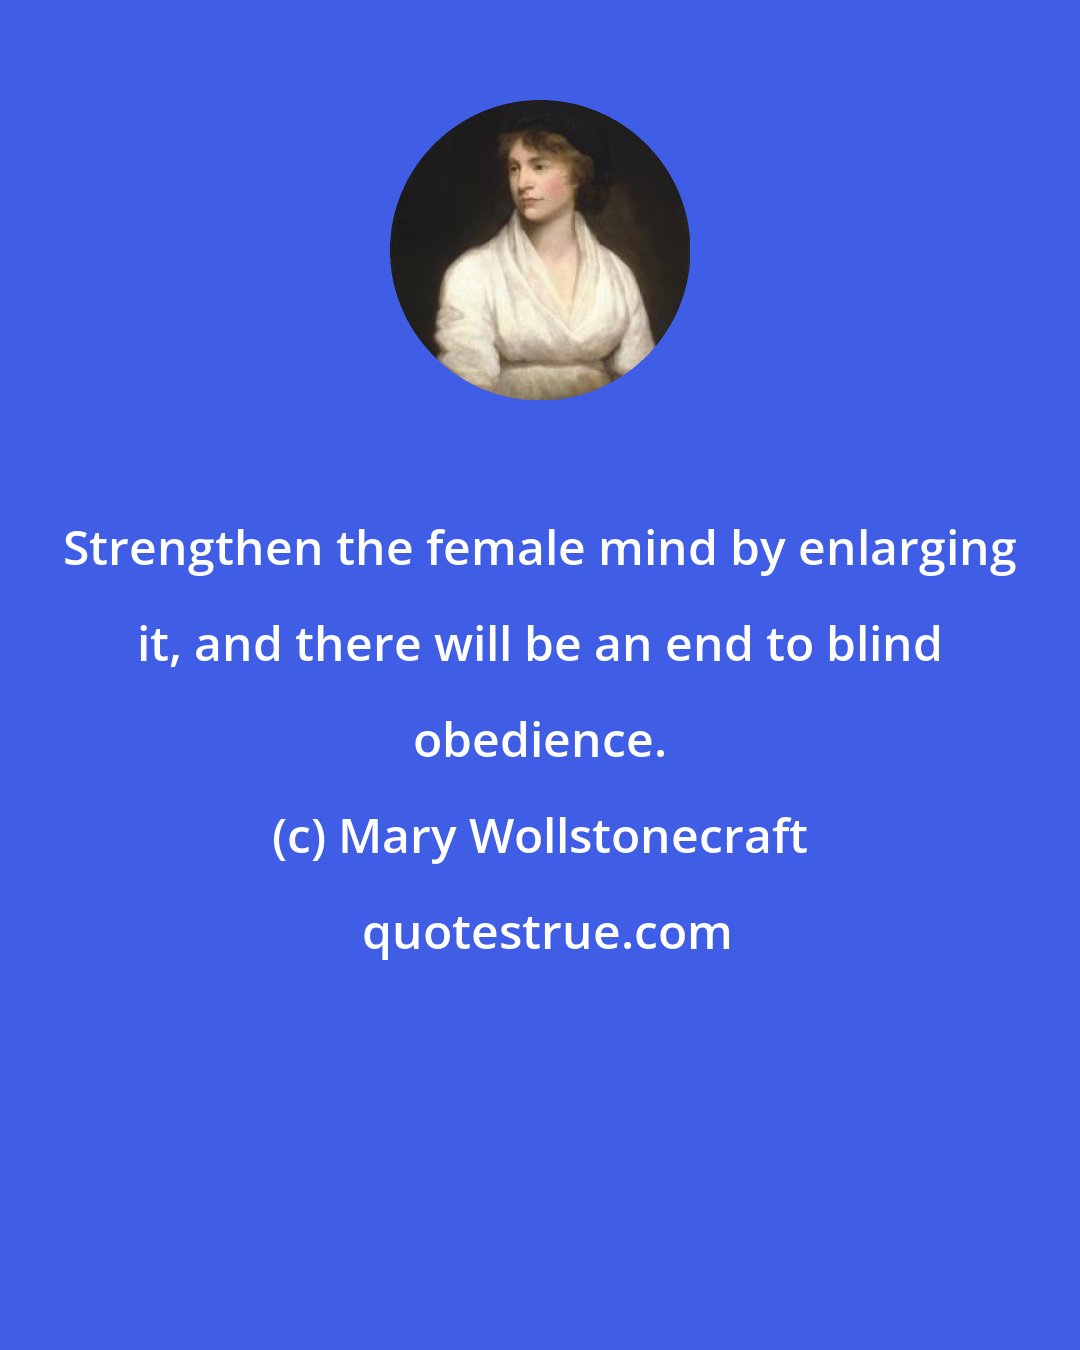 Mary Wollstonecraft: Strengthen the female mind by enlarging it, and there will be an end to blind obedience.